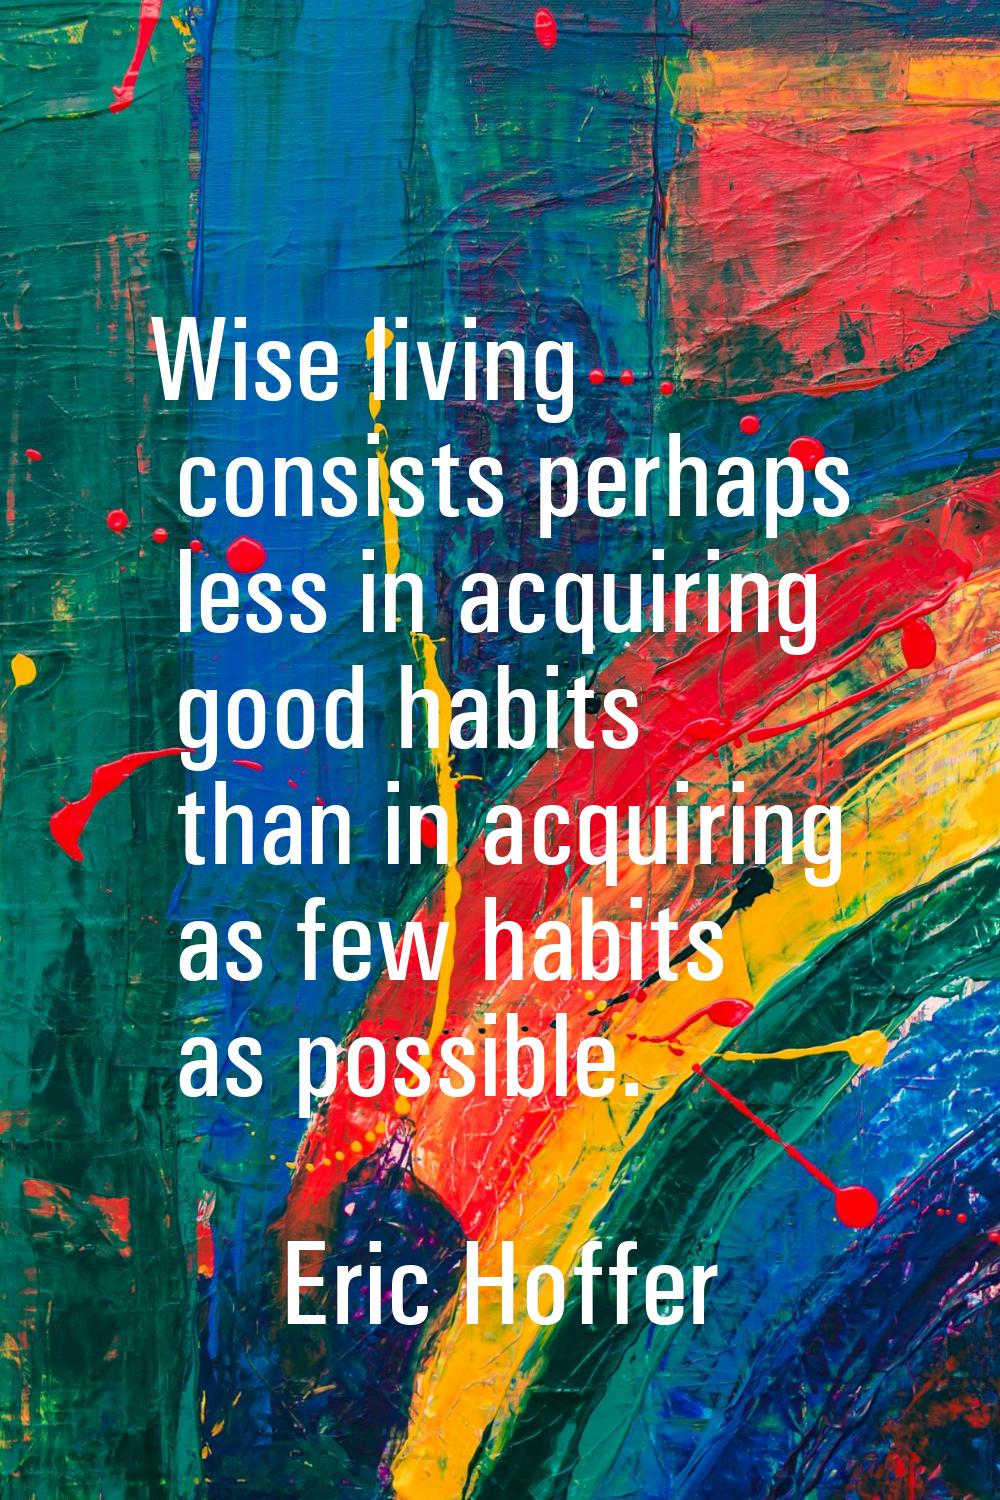 Wise living consists perhaps less in acquiring good habits than in acquiring as few habits as possi